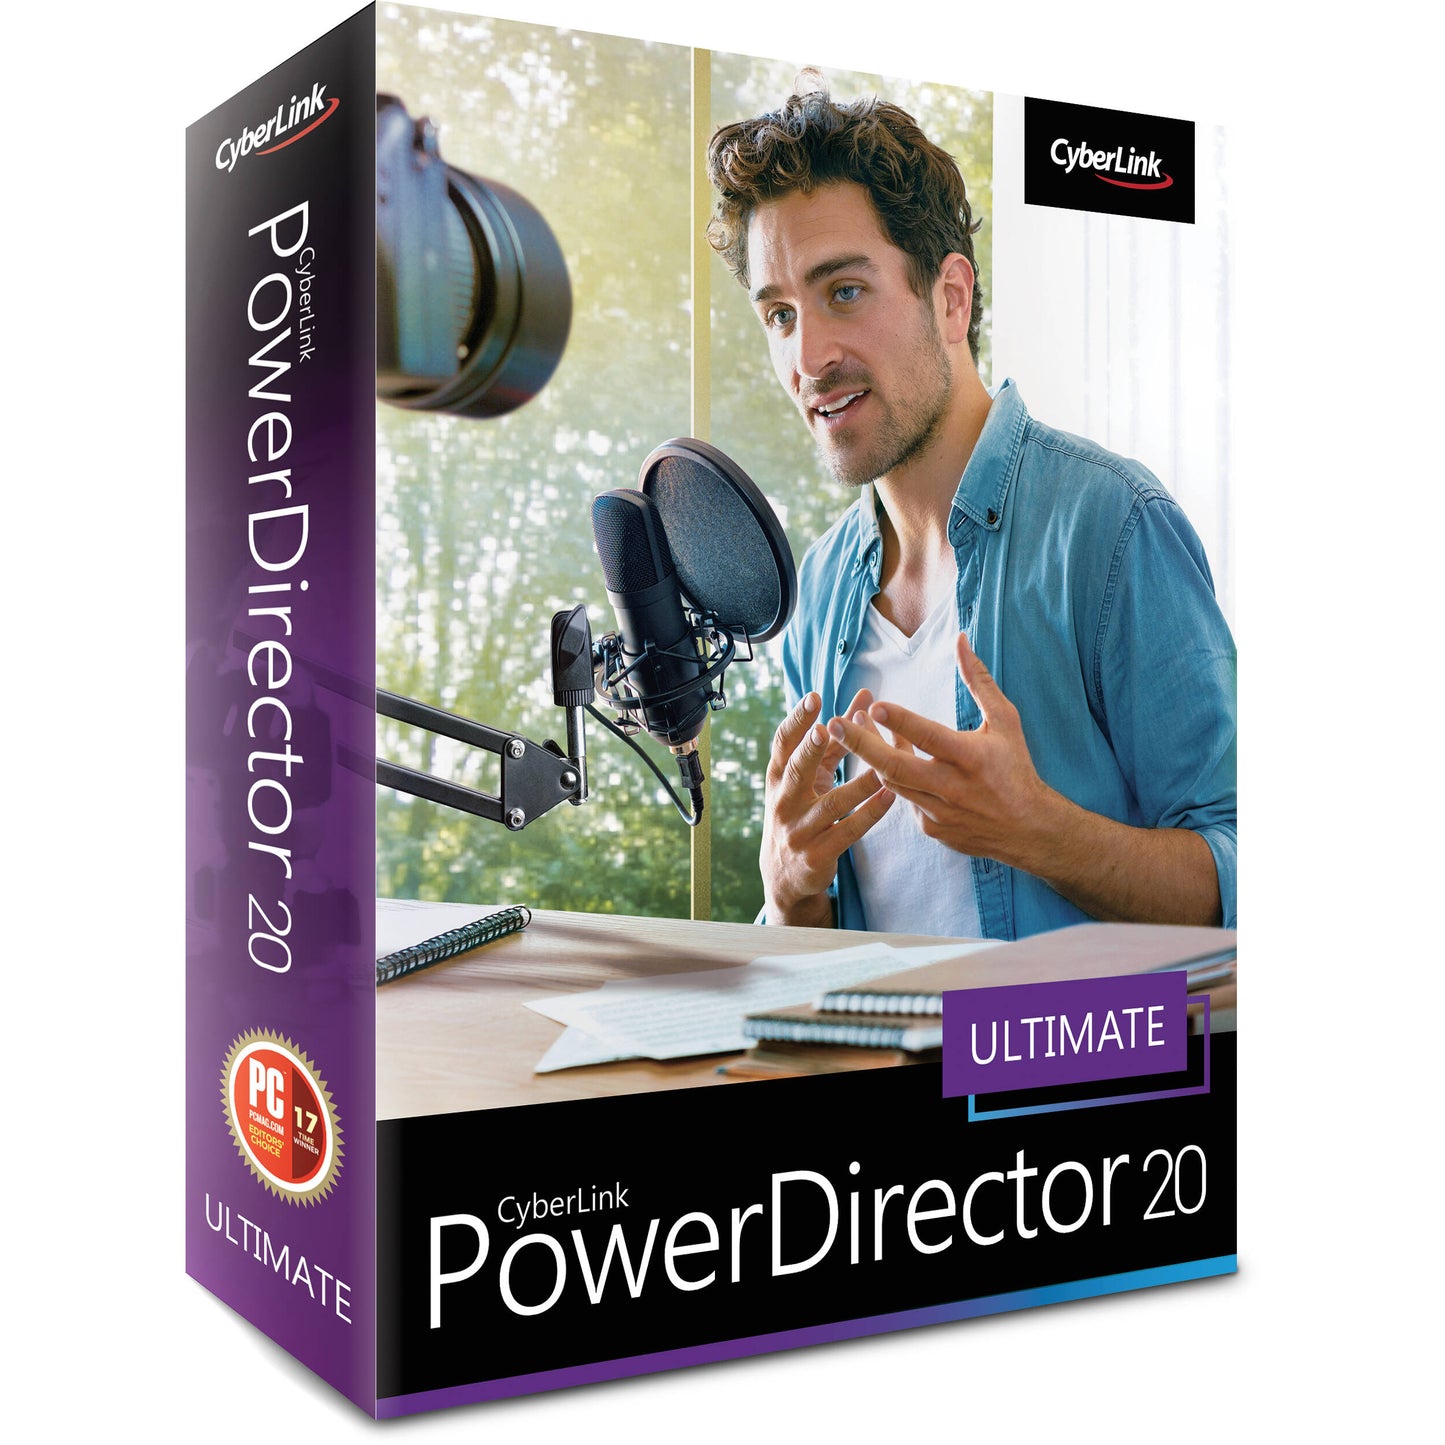 CyberLink PowerDirector 20 Ultimate Lifetime License fast delivery